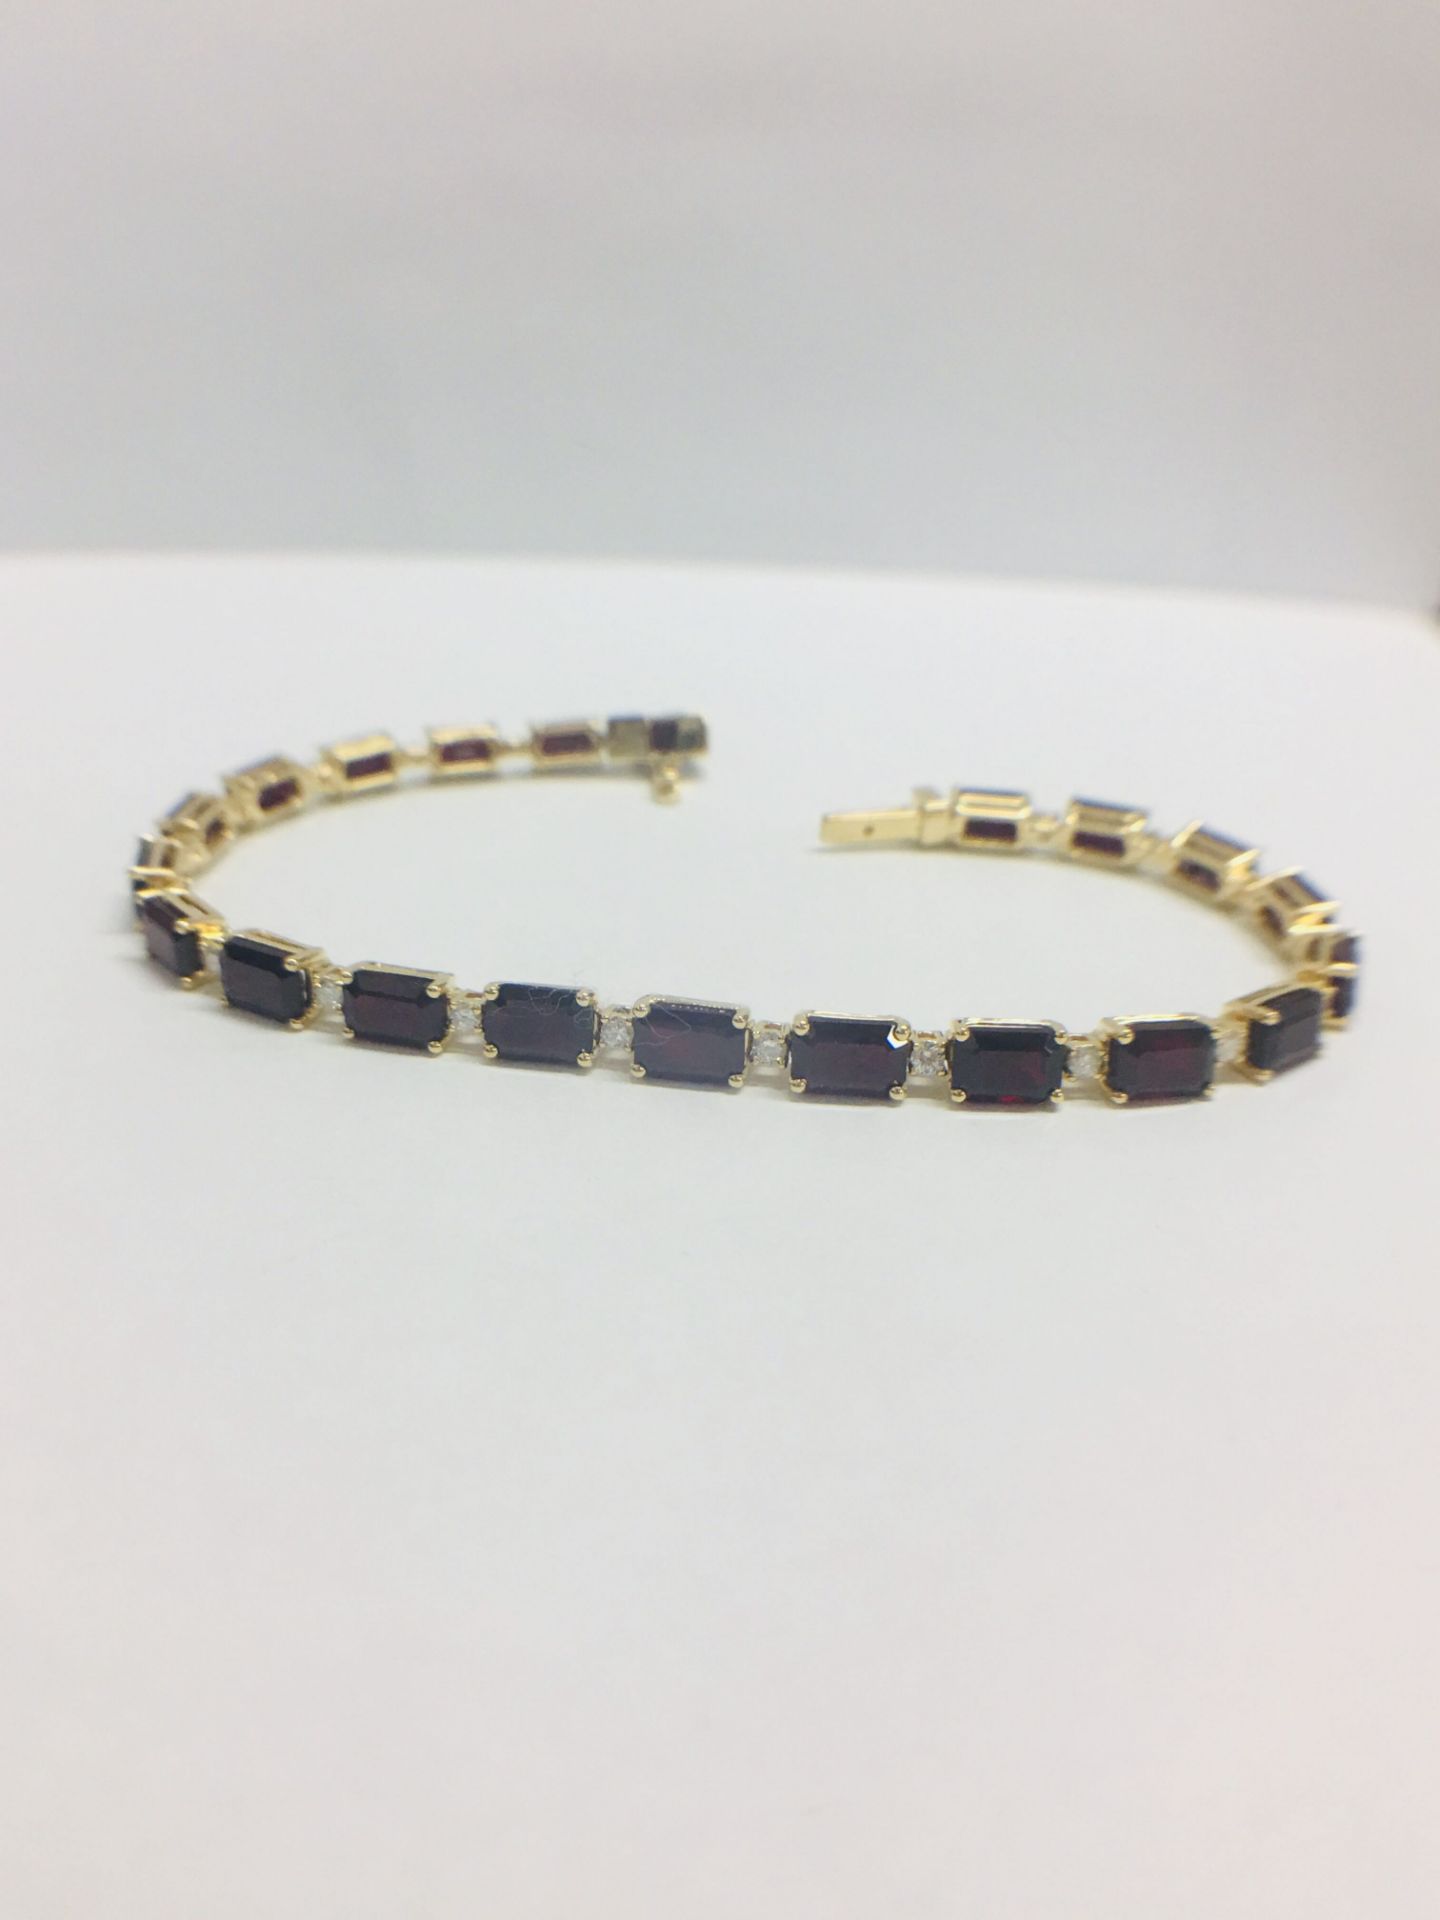 18ct Yellow Gold Ruby and Diamond Tennis Bracelet - Image 6 of 10